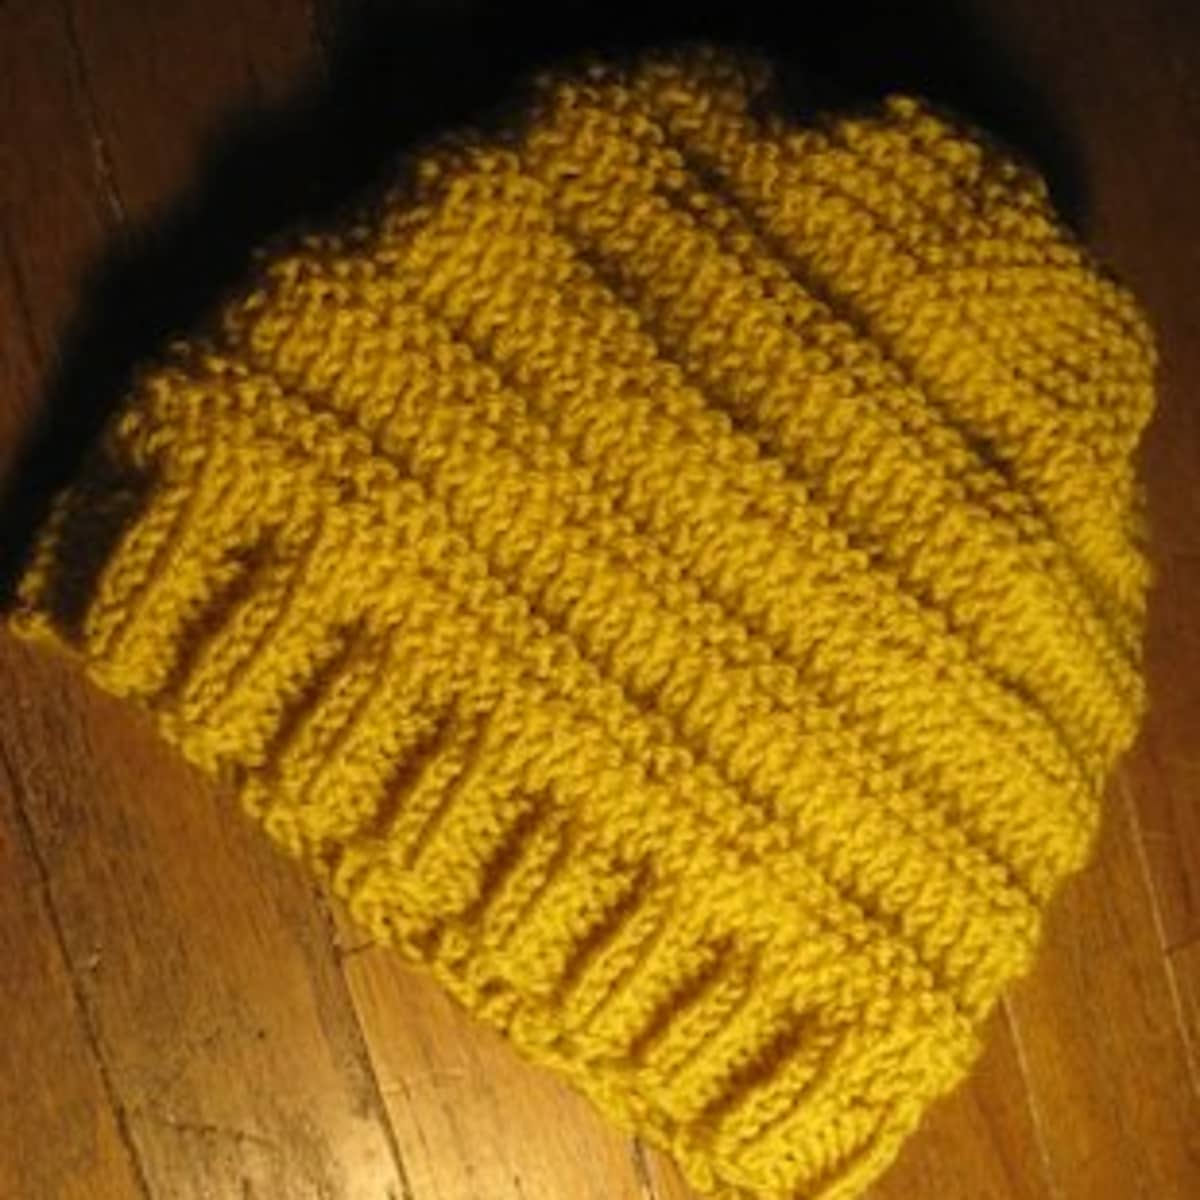 How to Knit: Basic Hat and Scarf Set, Beginner Knitting Pattern